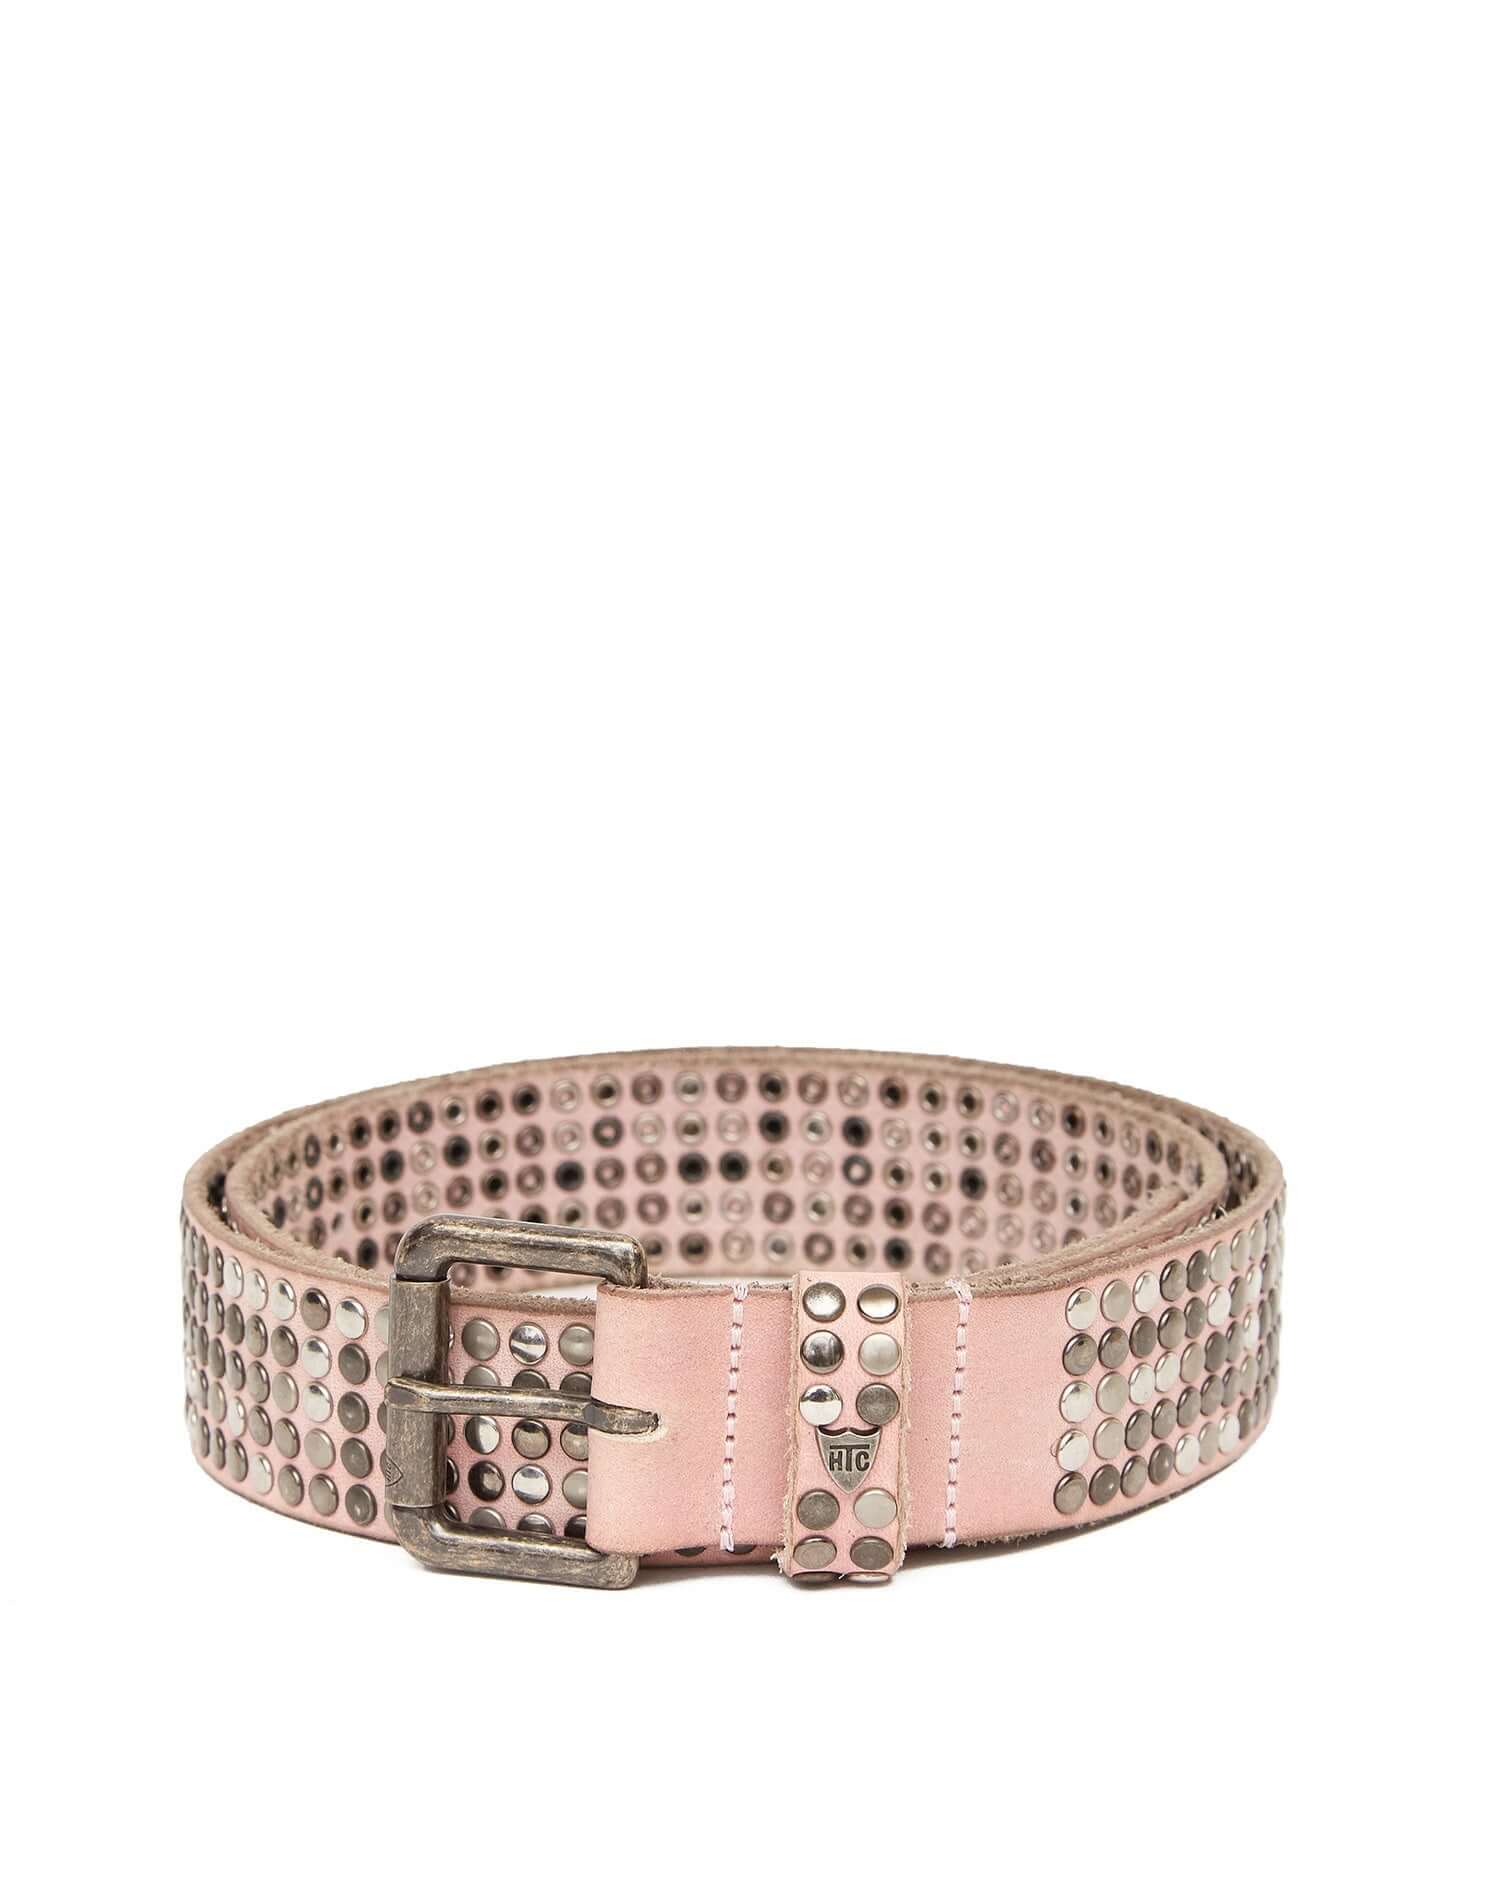 5.000 STUDS COLOR BELT Pink leather belt with mixed studs, brass buckle, studded zamac belt loop with HTC logo rivet. Height: 3.5 cm. Made in Italy. HTC LOS ANGELES